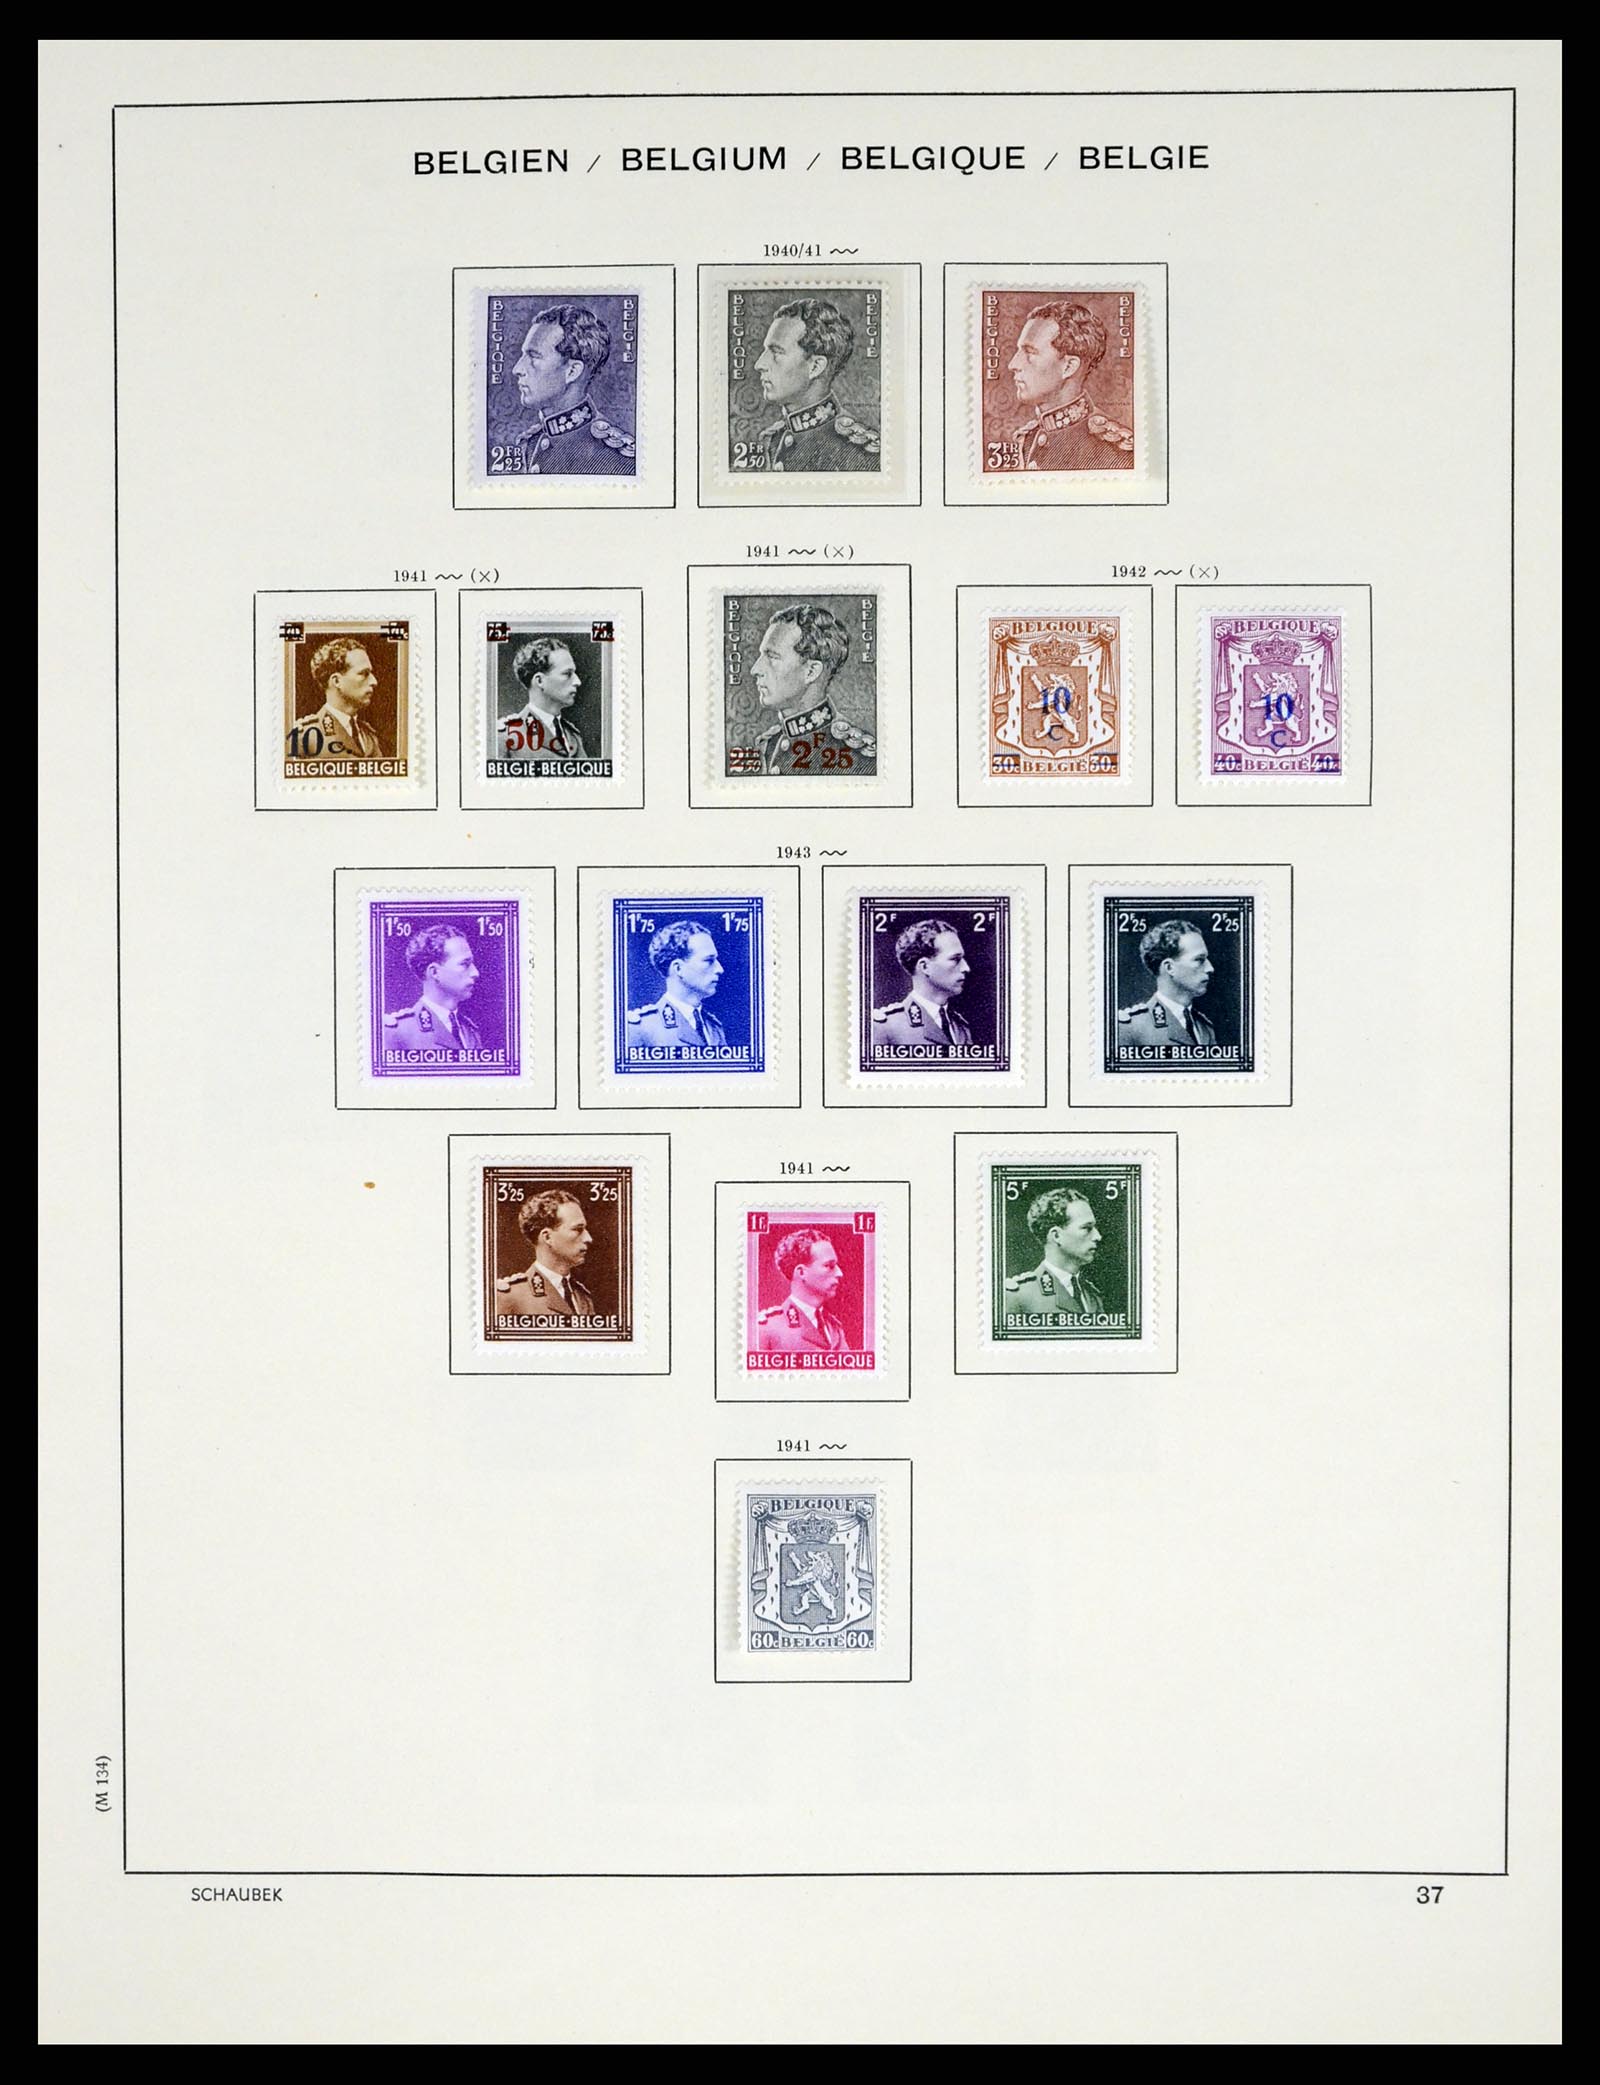 37595 040 - Stamp collection 37595 Super collection Belgium 1849-2015!